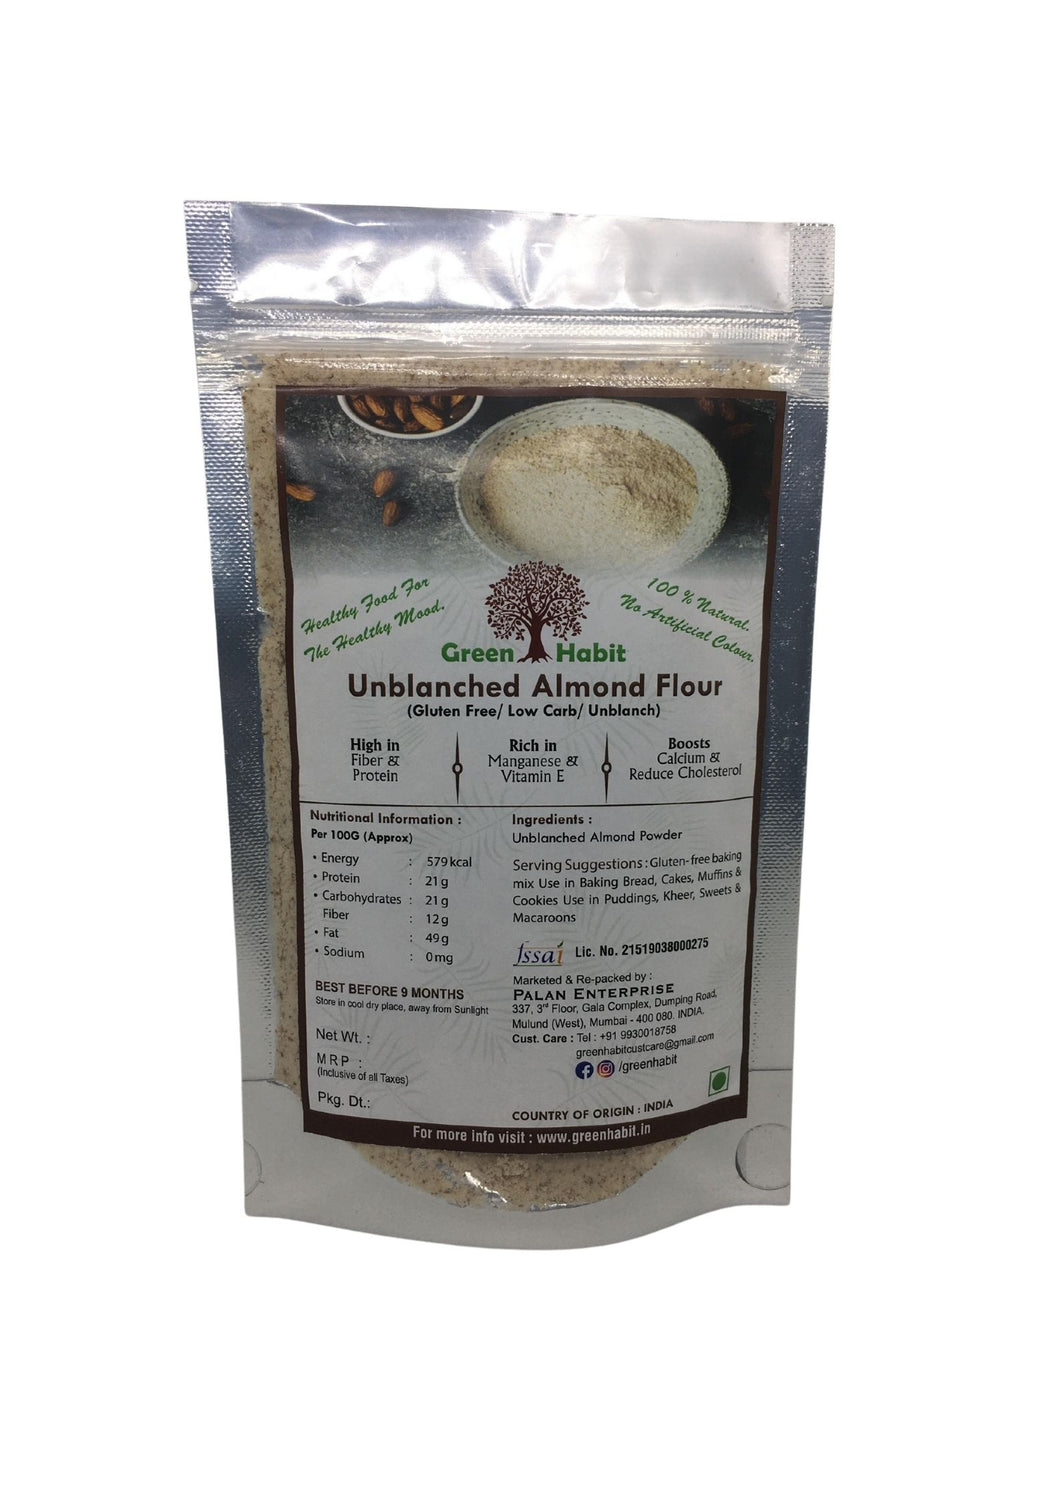 Greenhabit Almond Meal aka Unblanched Almond Flour with Essential Fatty Acids, Almond Meal for Baking (Keto-Friendly) - Green Habit